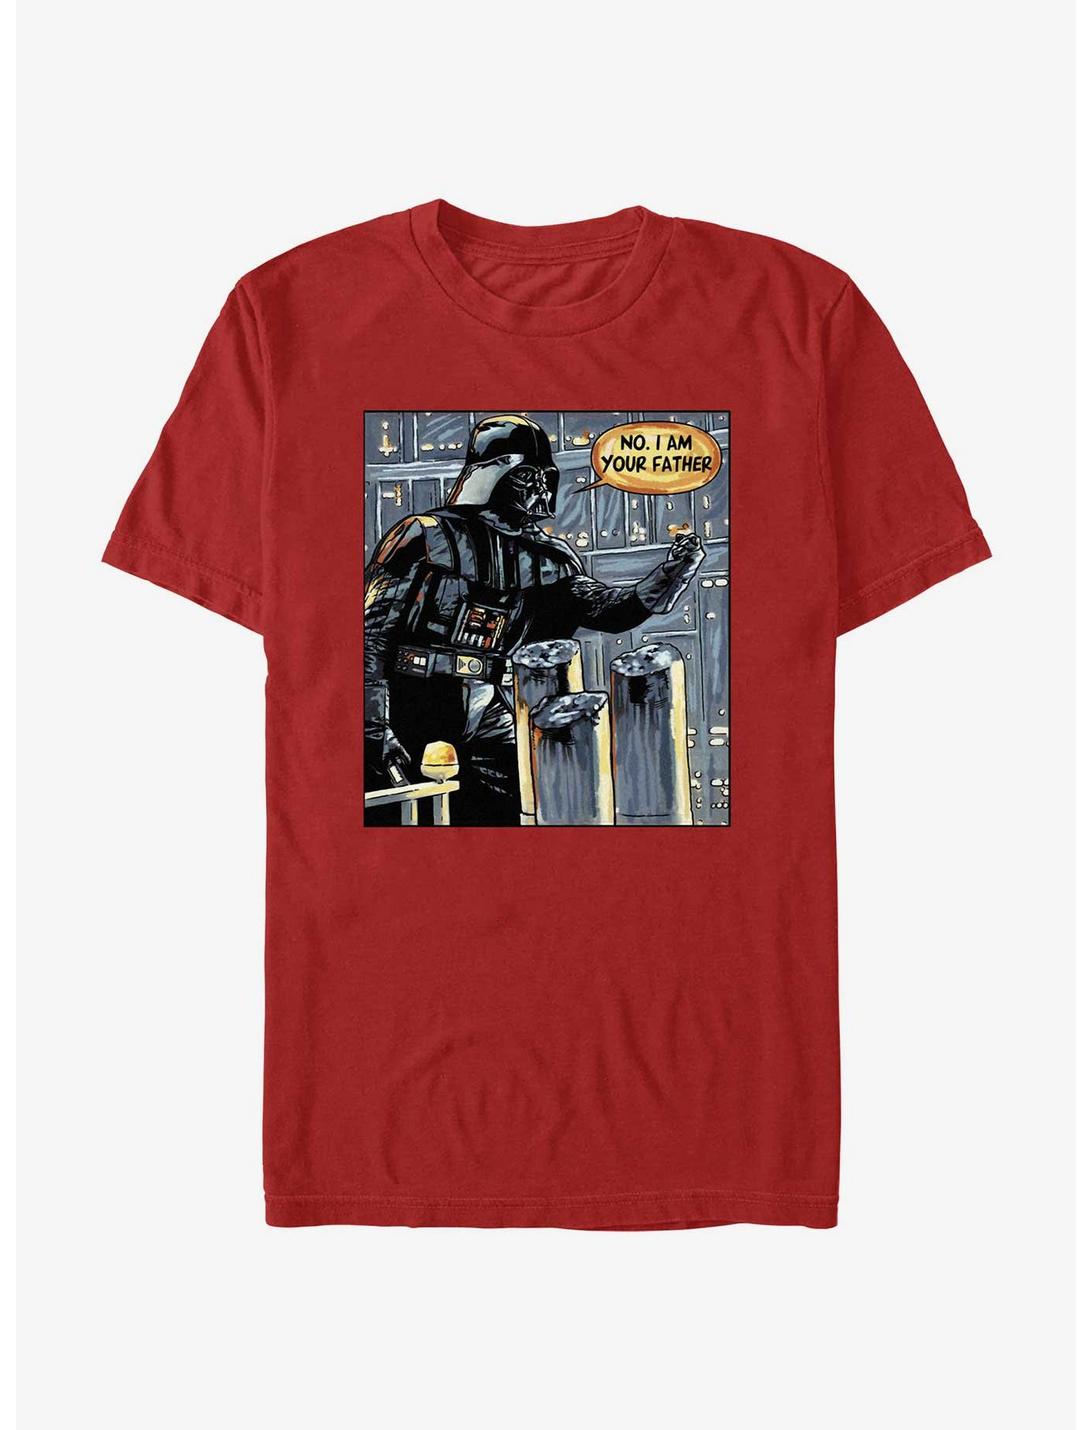 Star Wars Vader I Am Your Father T-Shirt, RED, hi-res